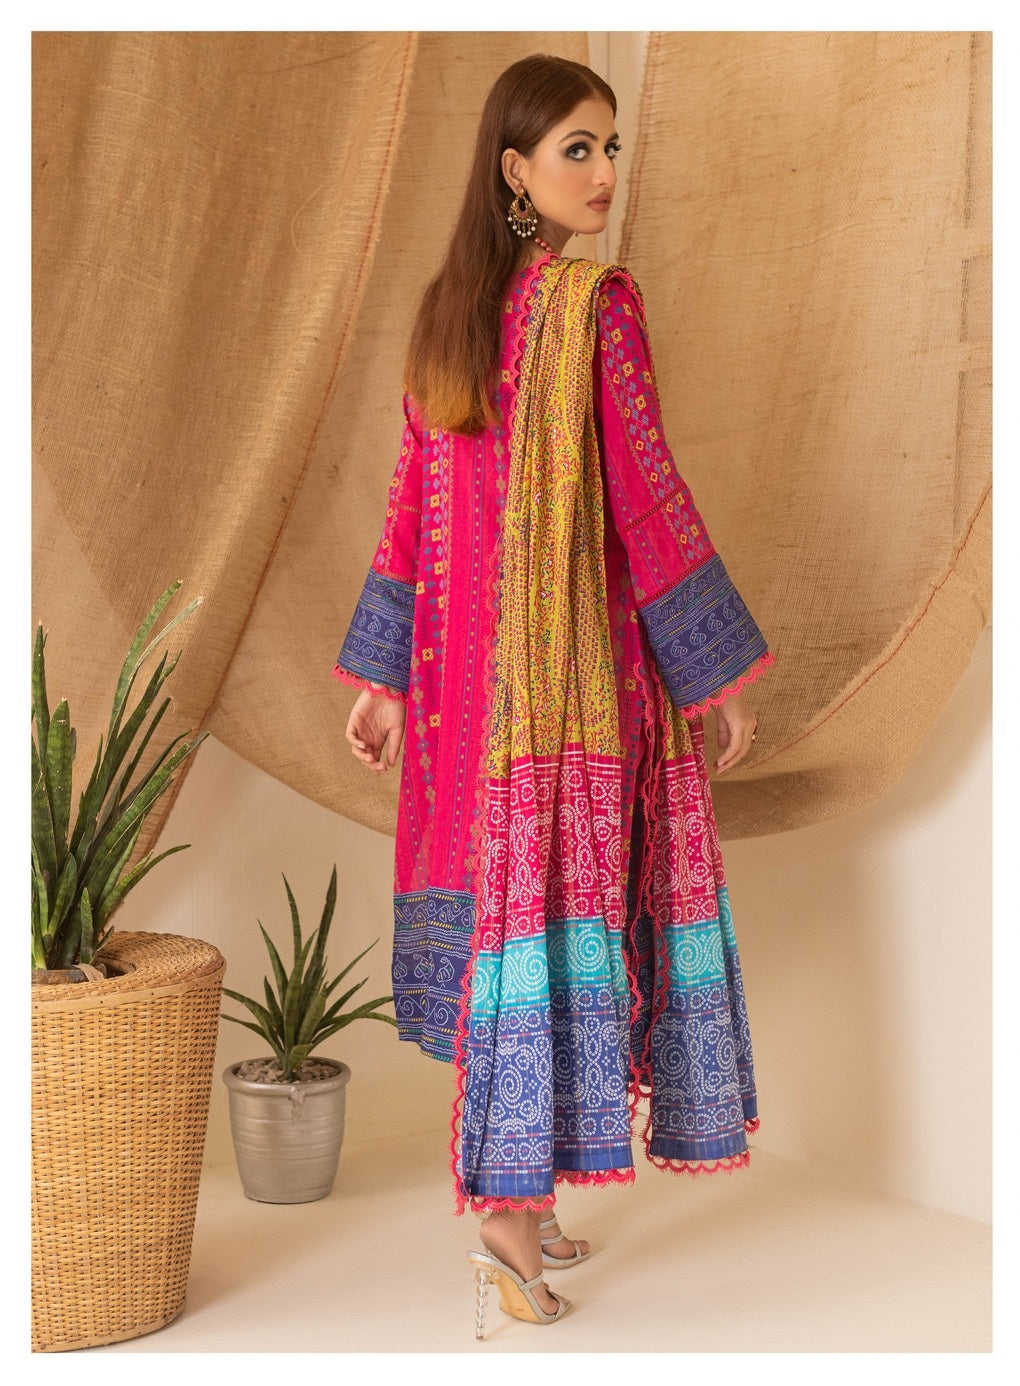 Colors by Al Zohaib Printed Lawn Suits Unstitched 3 Piece CSD-23-09 - Summer Collection